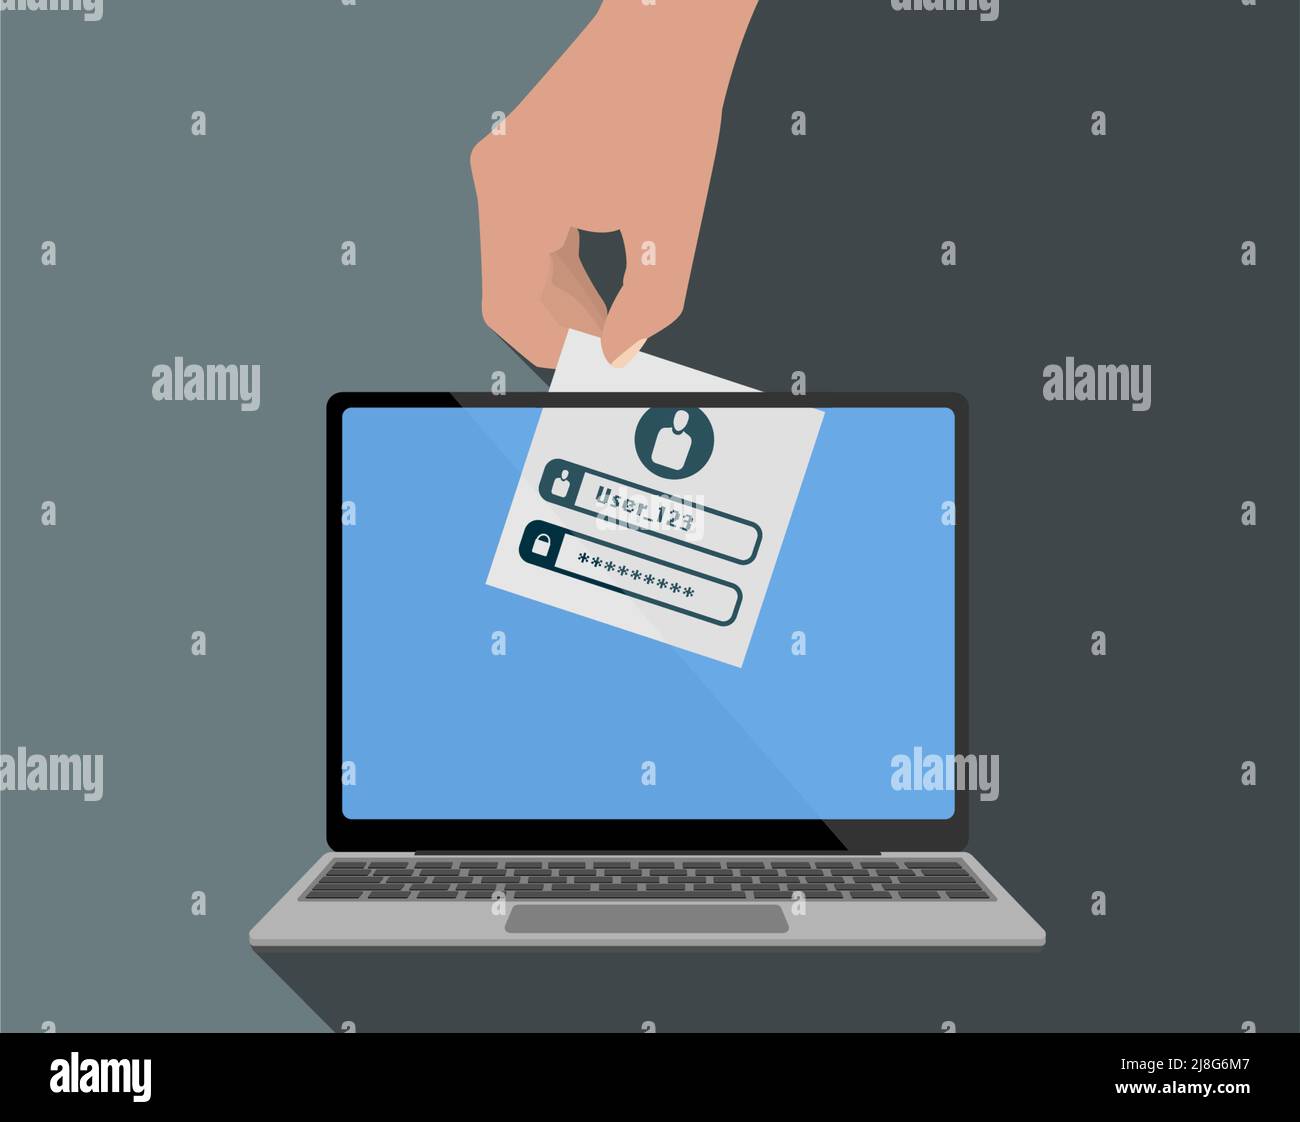 stealing login information and password from computer, identity theft and cyber crime vector illustration Stock Vector